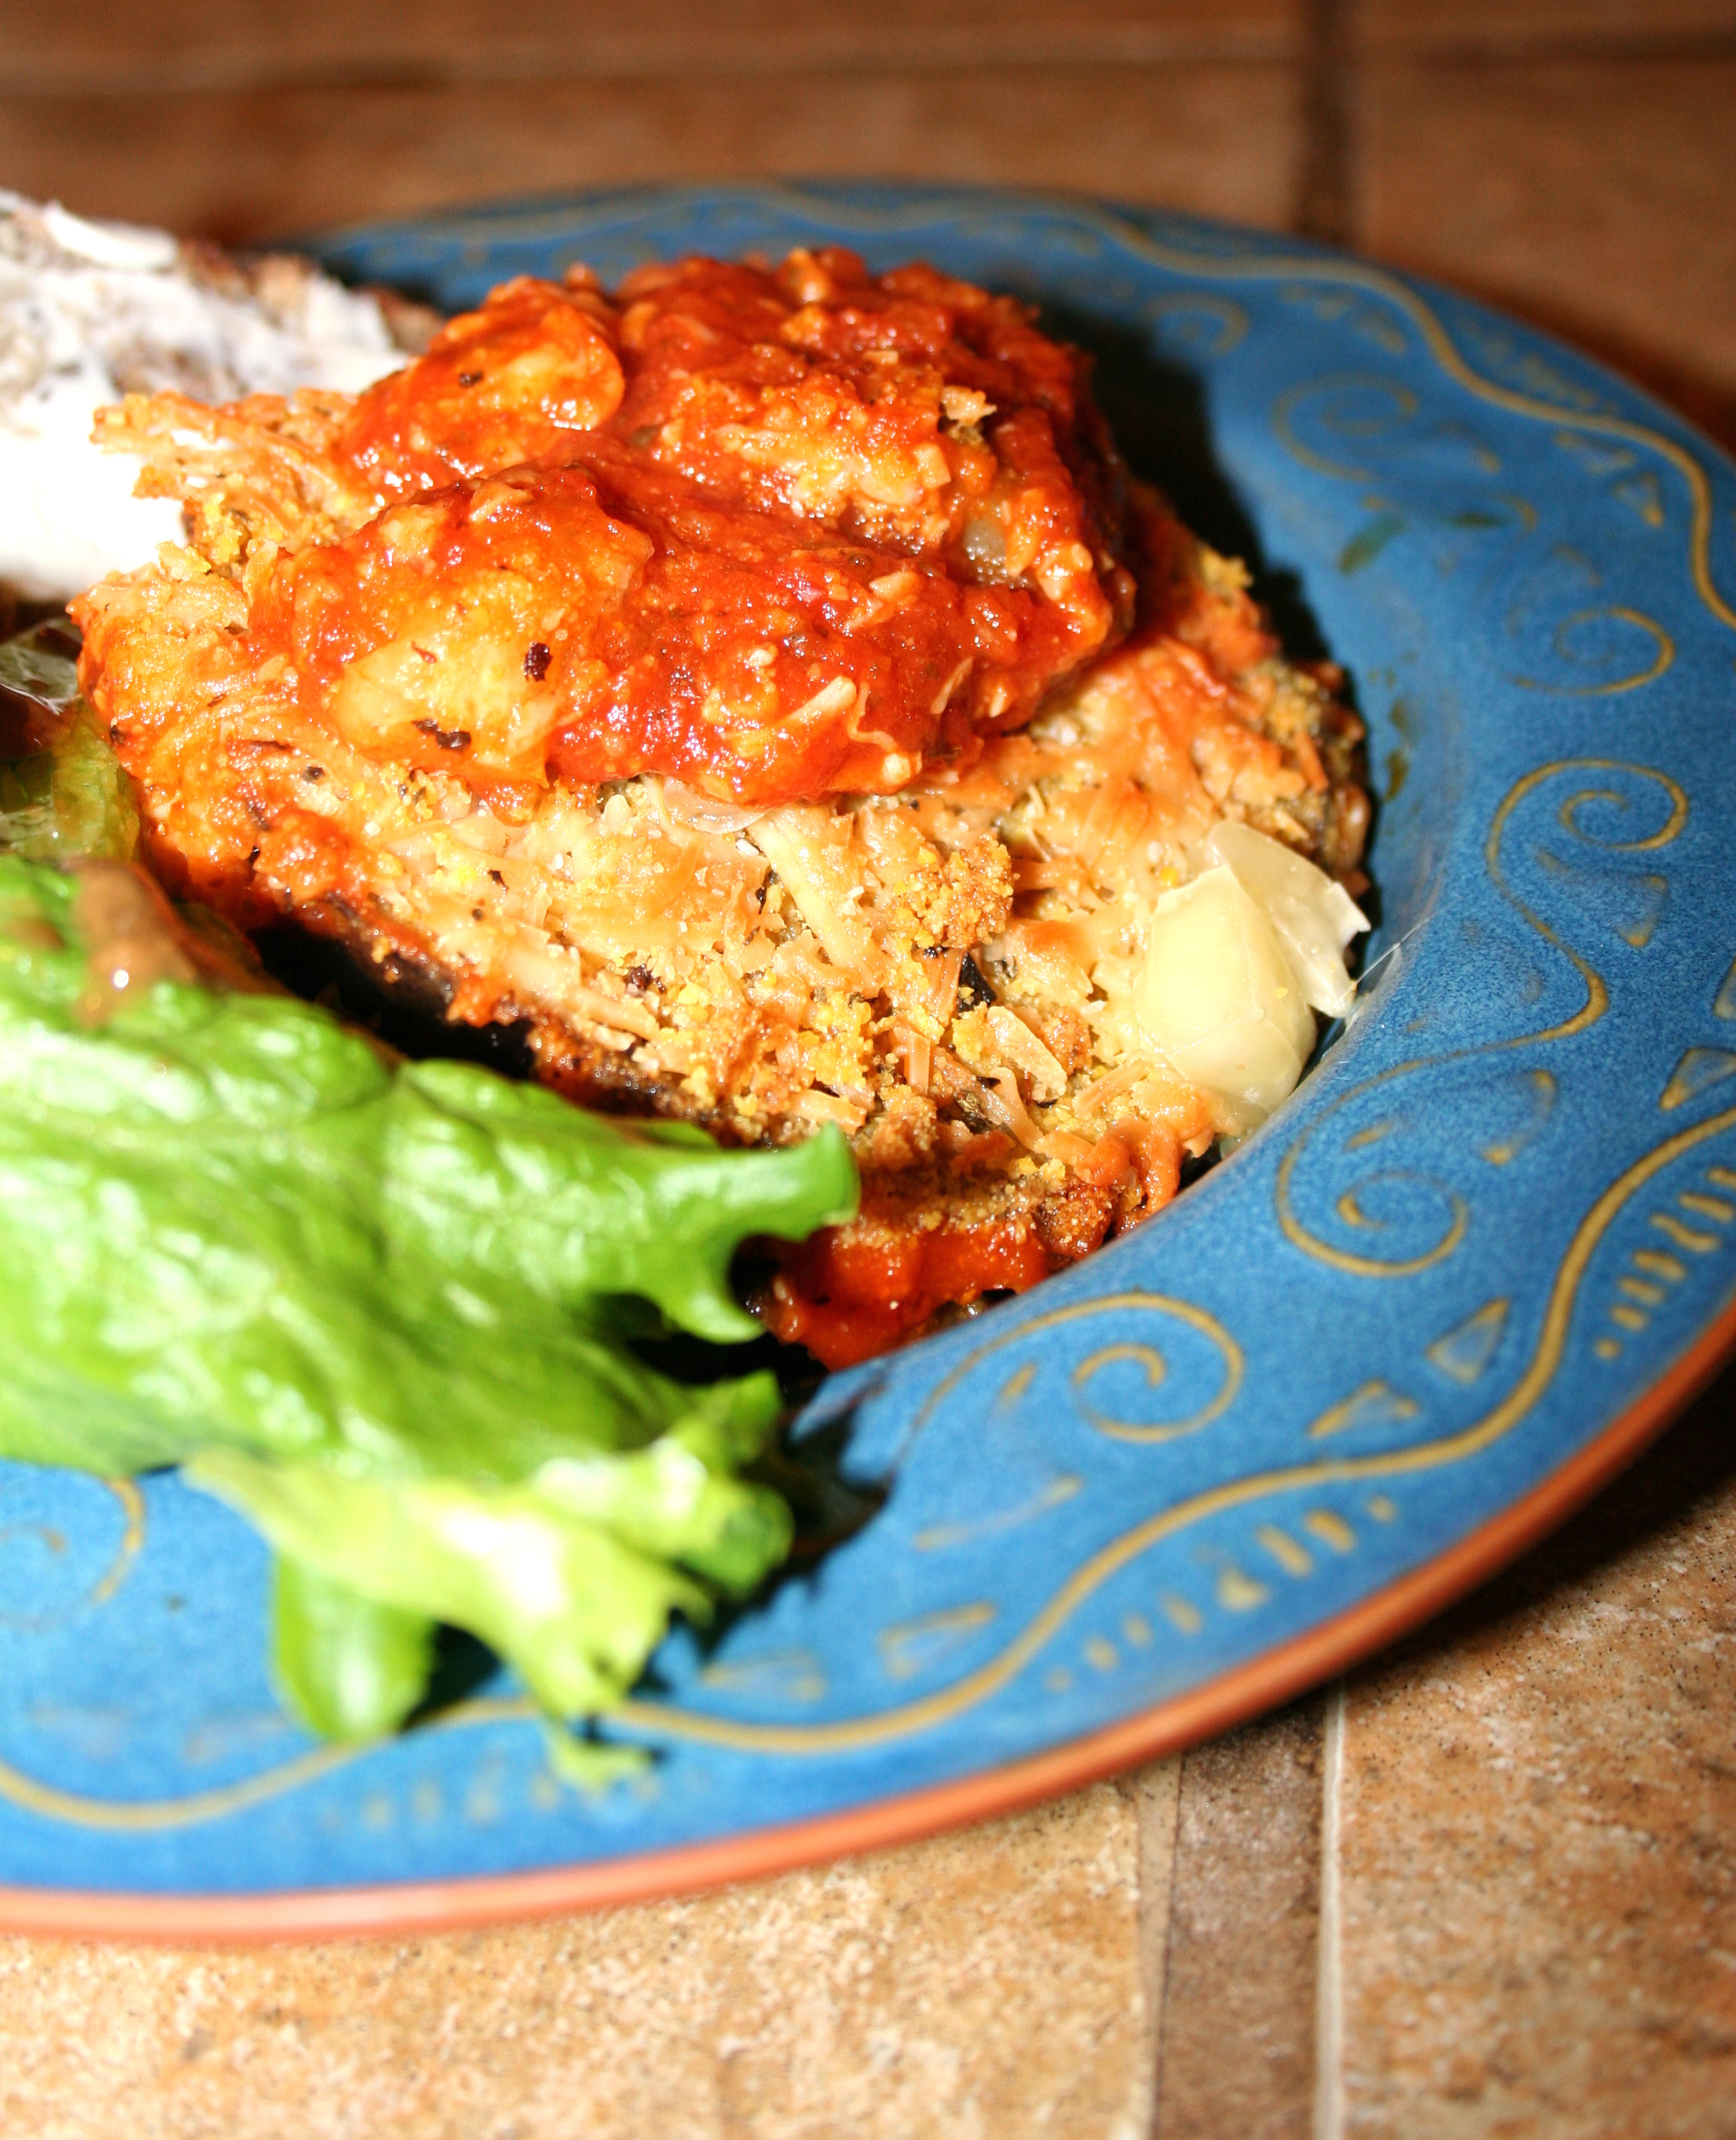 Eggplant parm, ready to eat